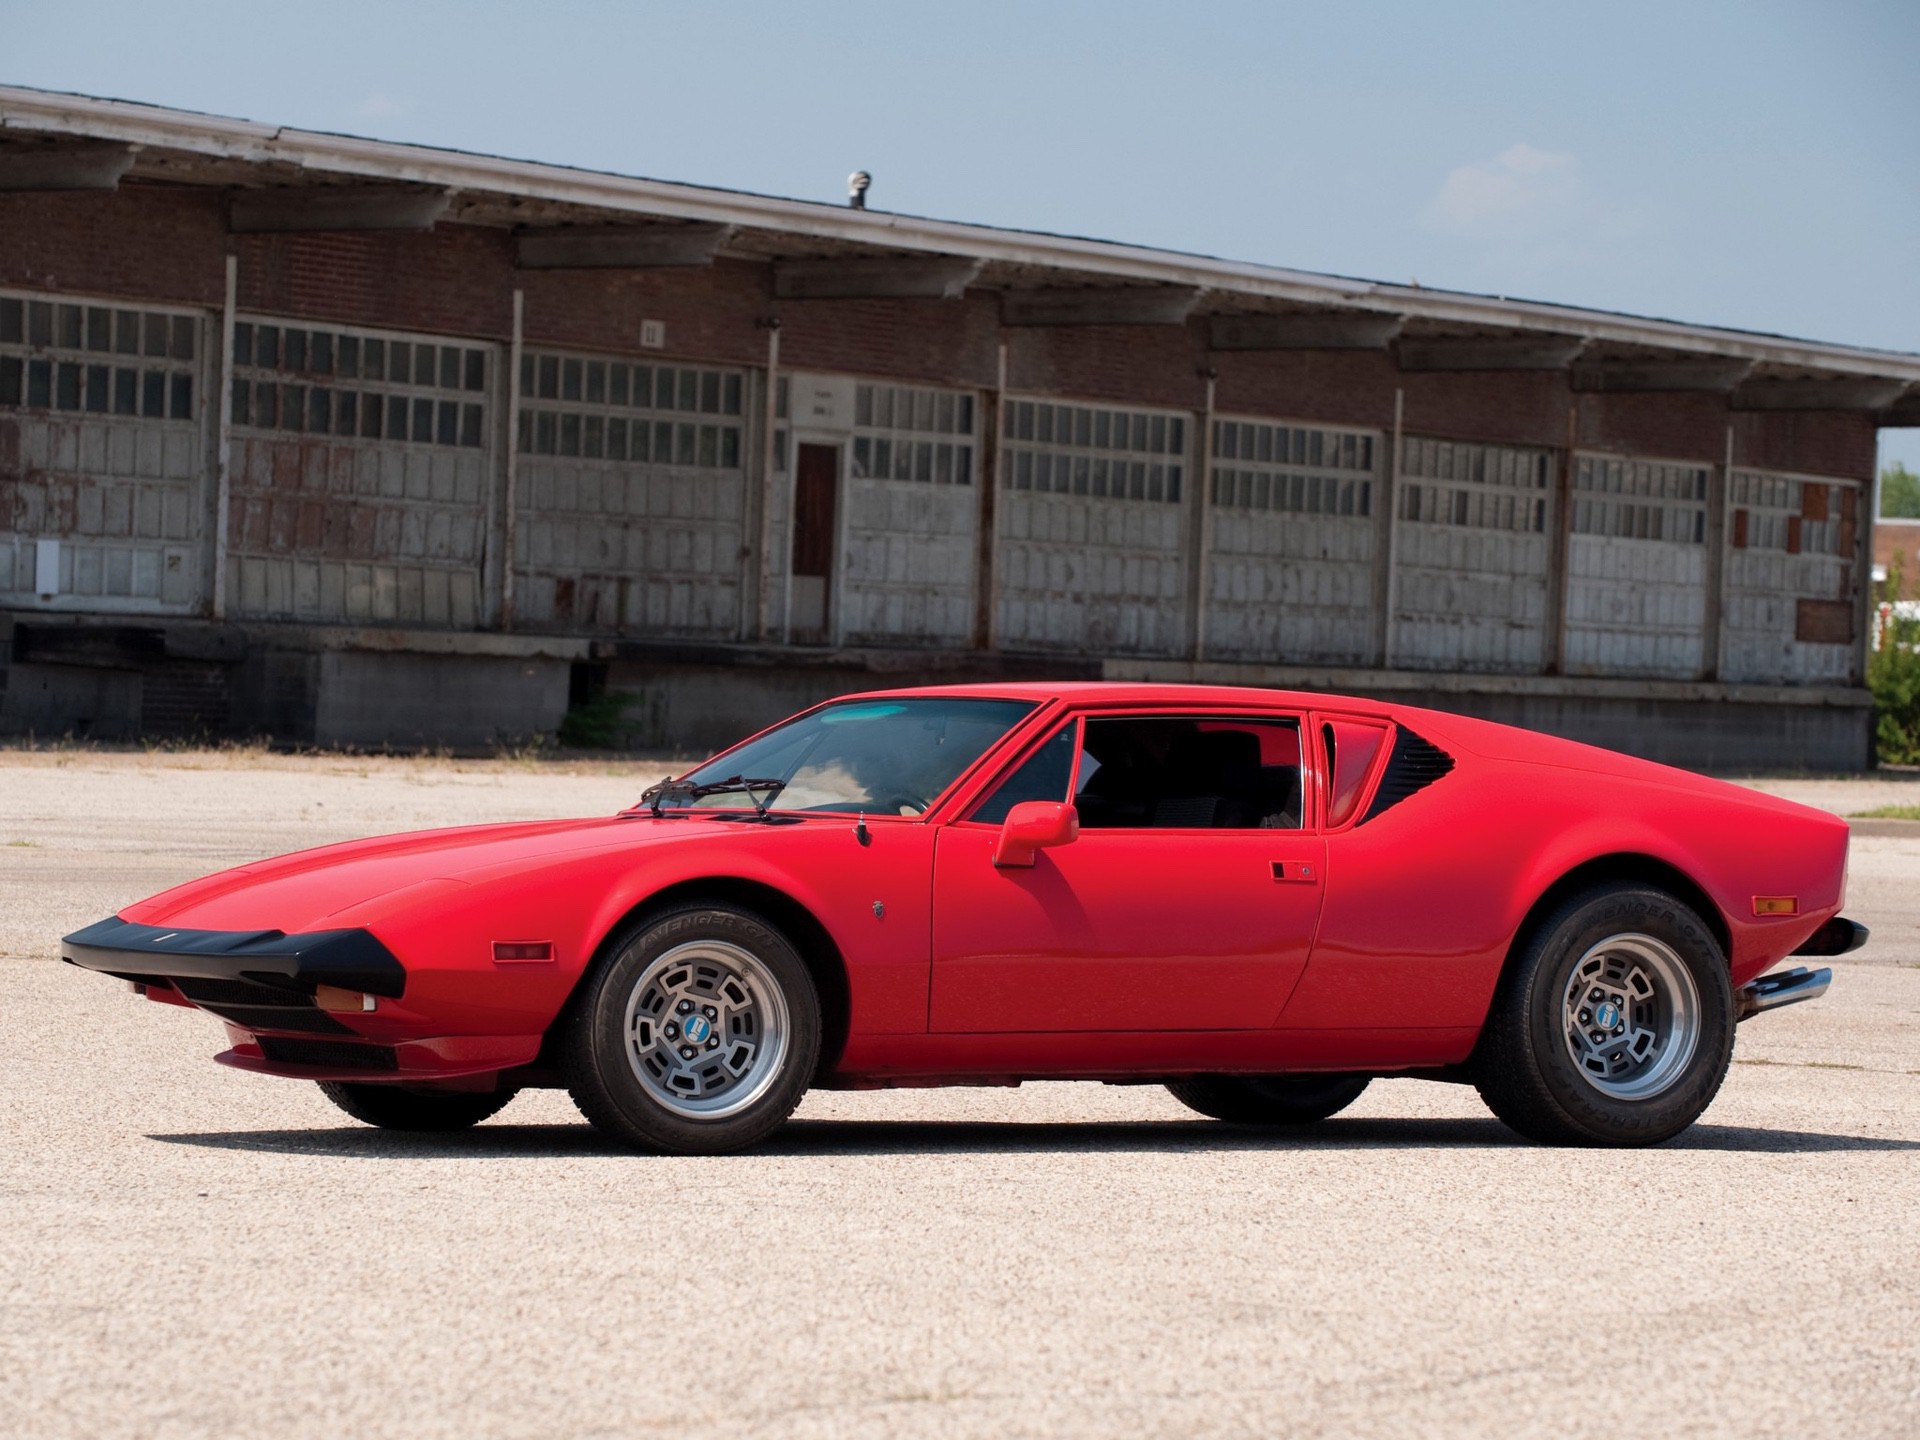 Red DeTomaso Pantera parked on ground in front of building